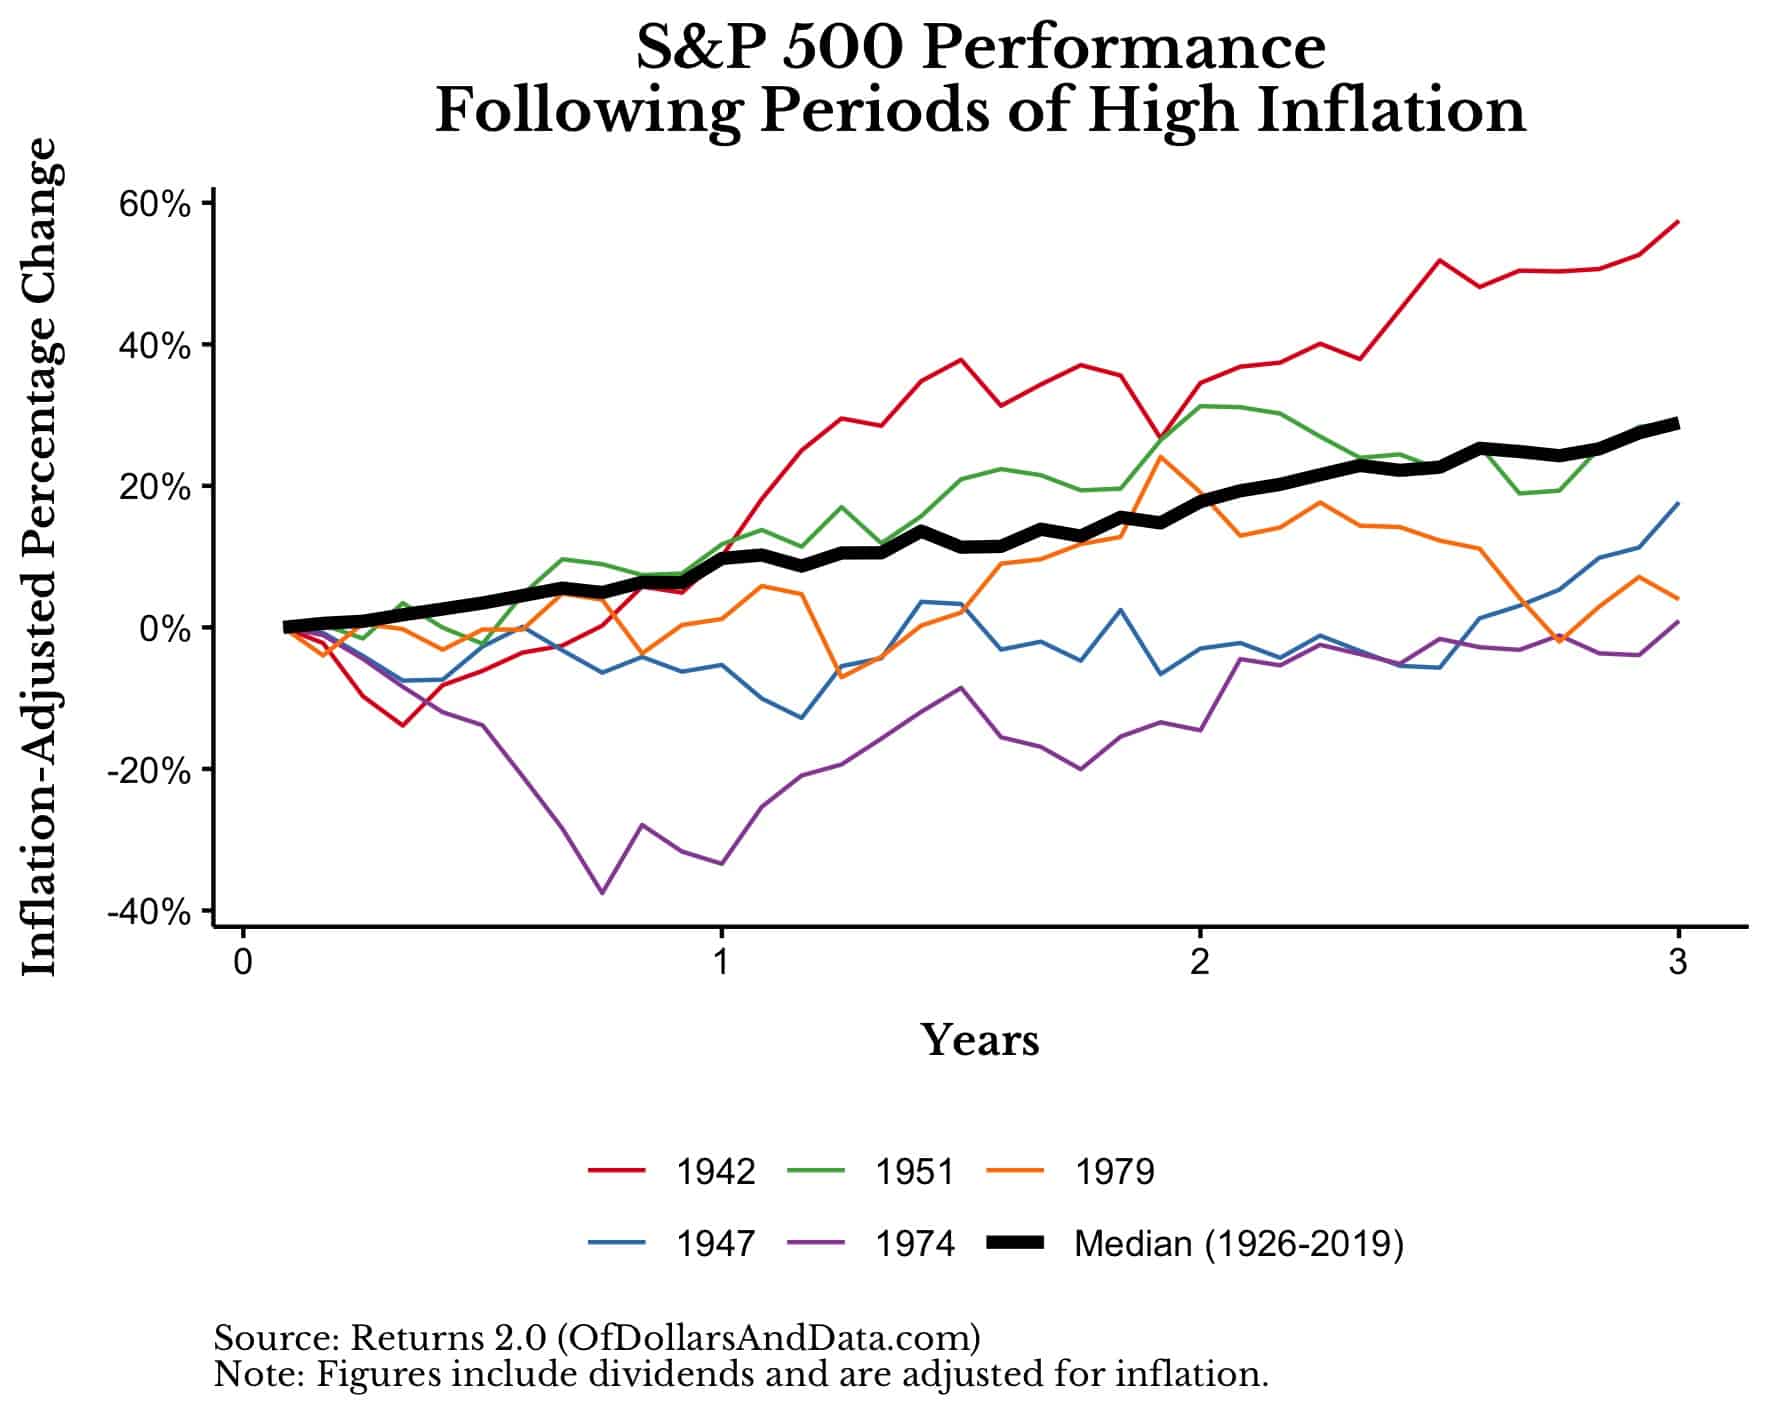 S&P 500 performance following periods of high inflation.